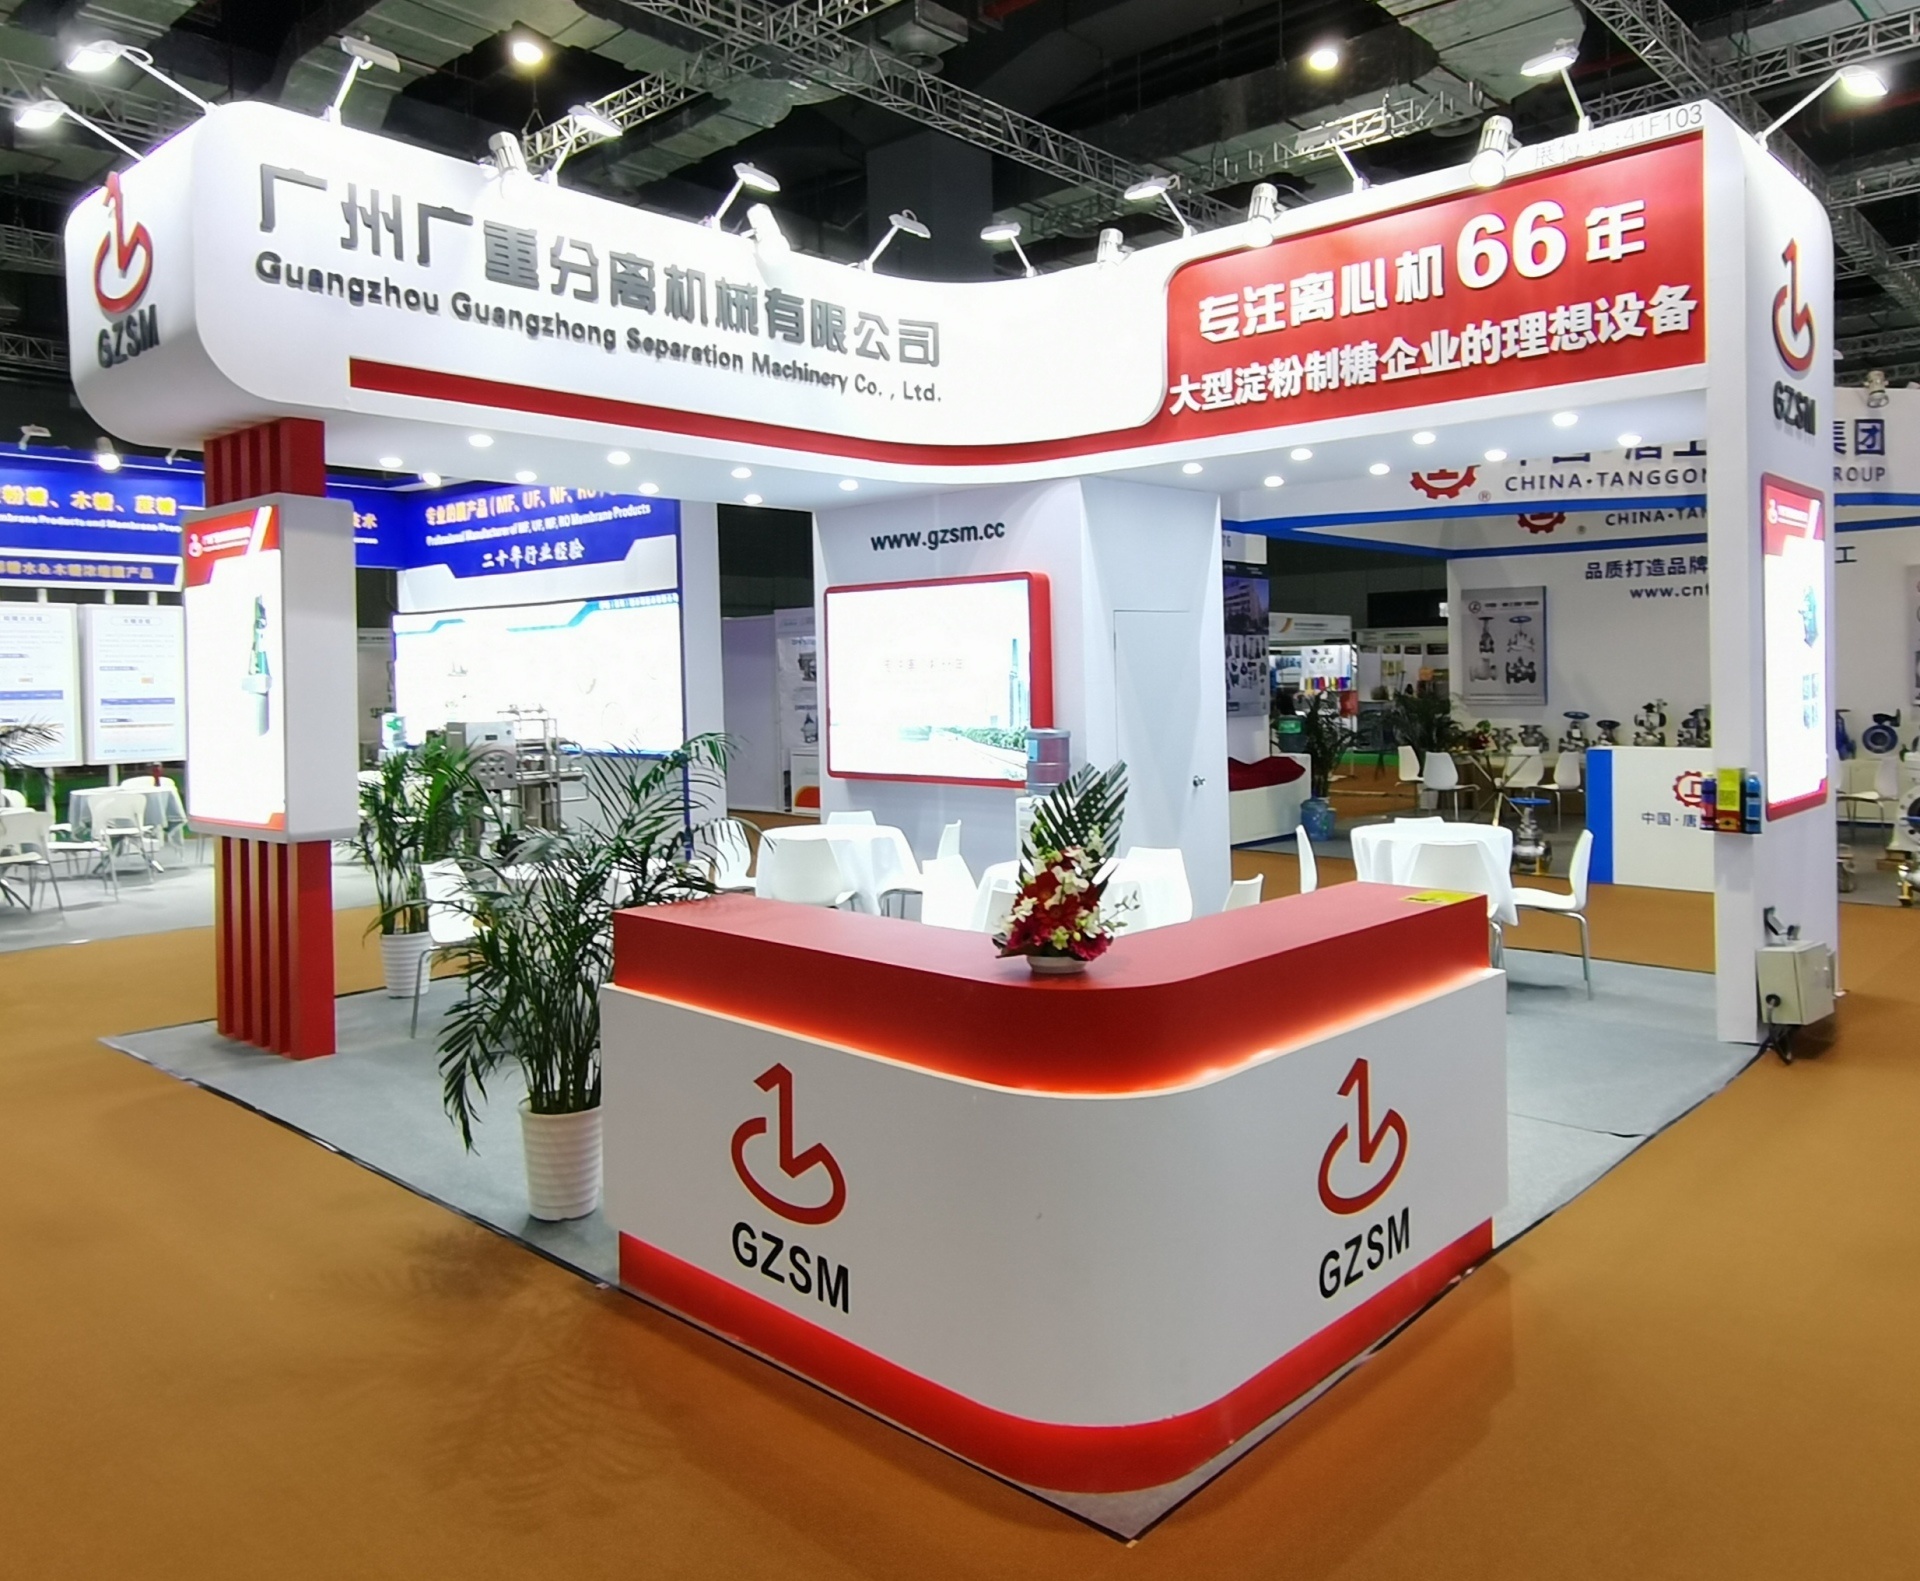 The 14th Shanghai International Starch and Starch Derivatives Exhibition